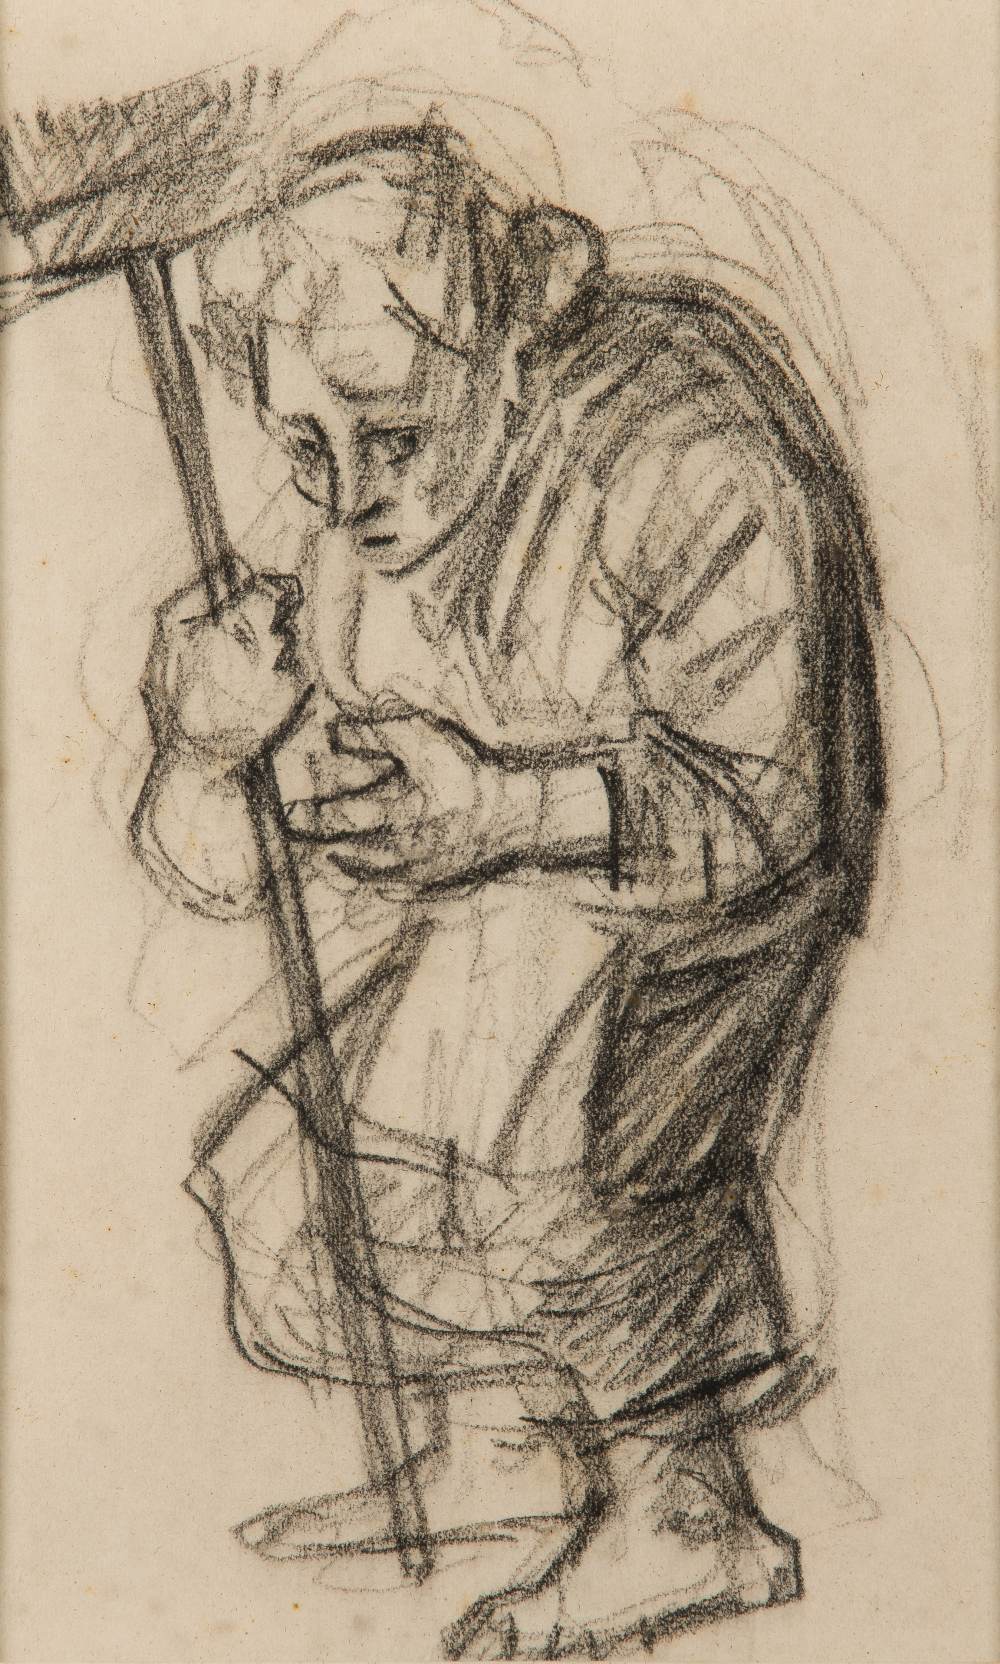 •Michael Salaman (1911-1987) Witch dates from c. 1936-37. soft pencil 13 cm by 7.5 cm; 5 in by 3 in